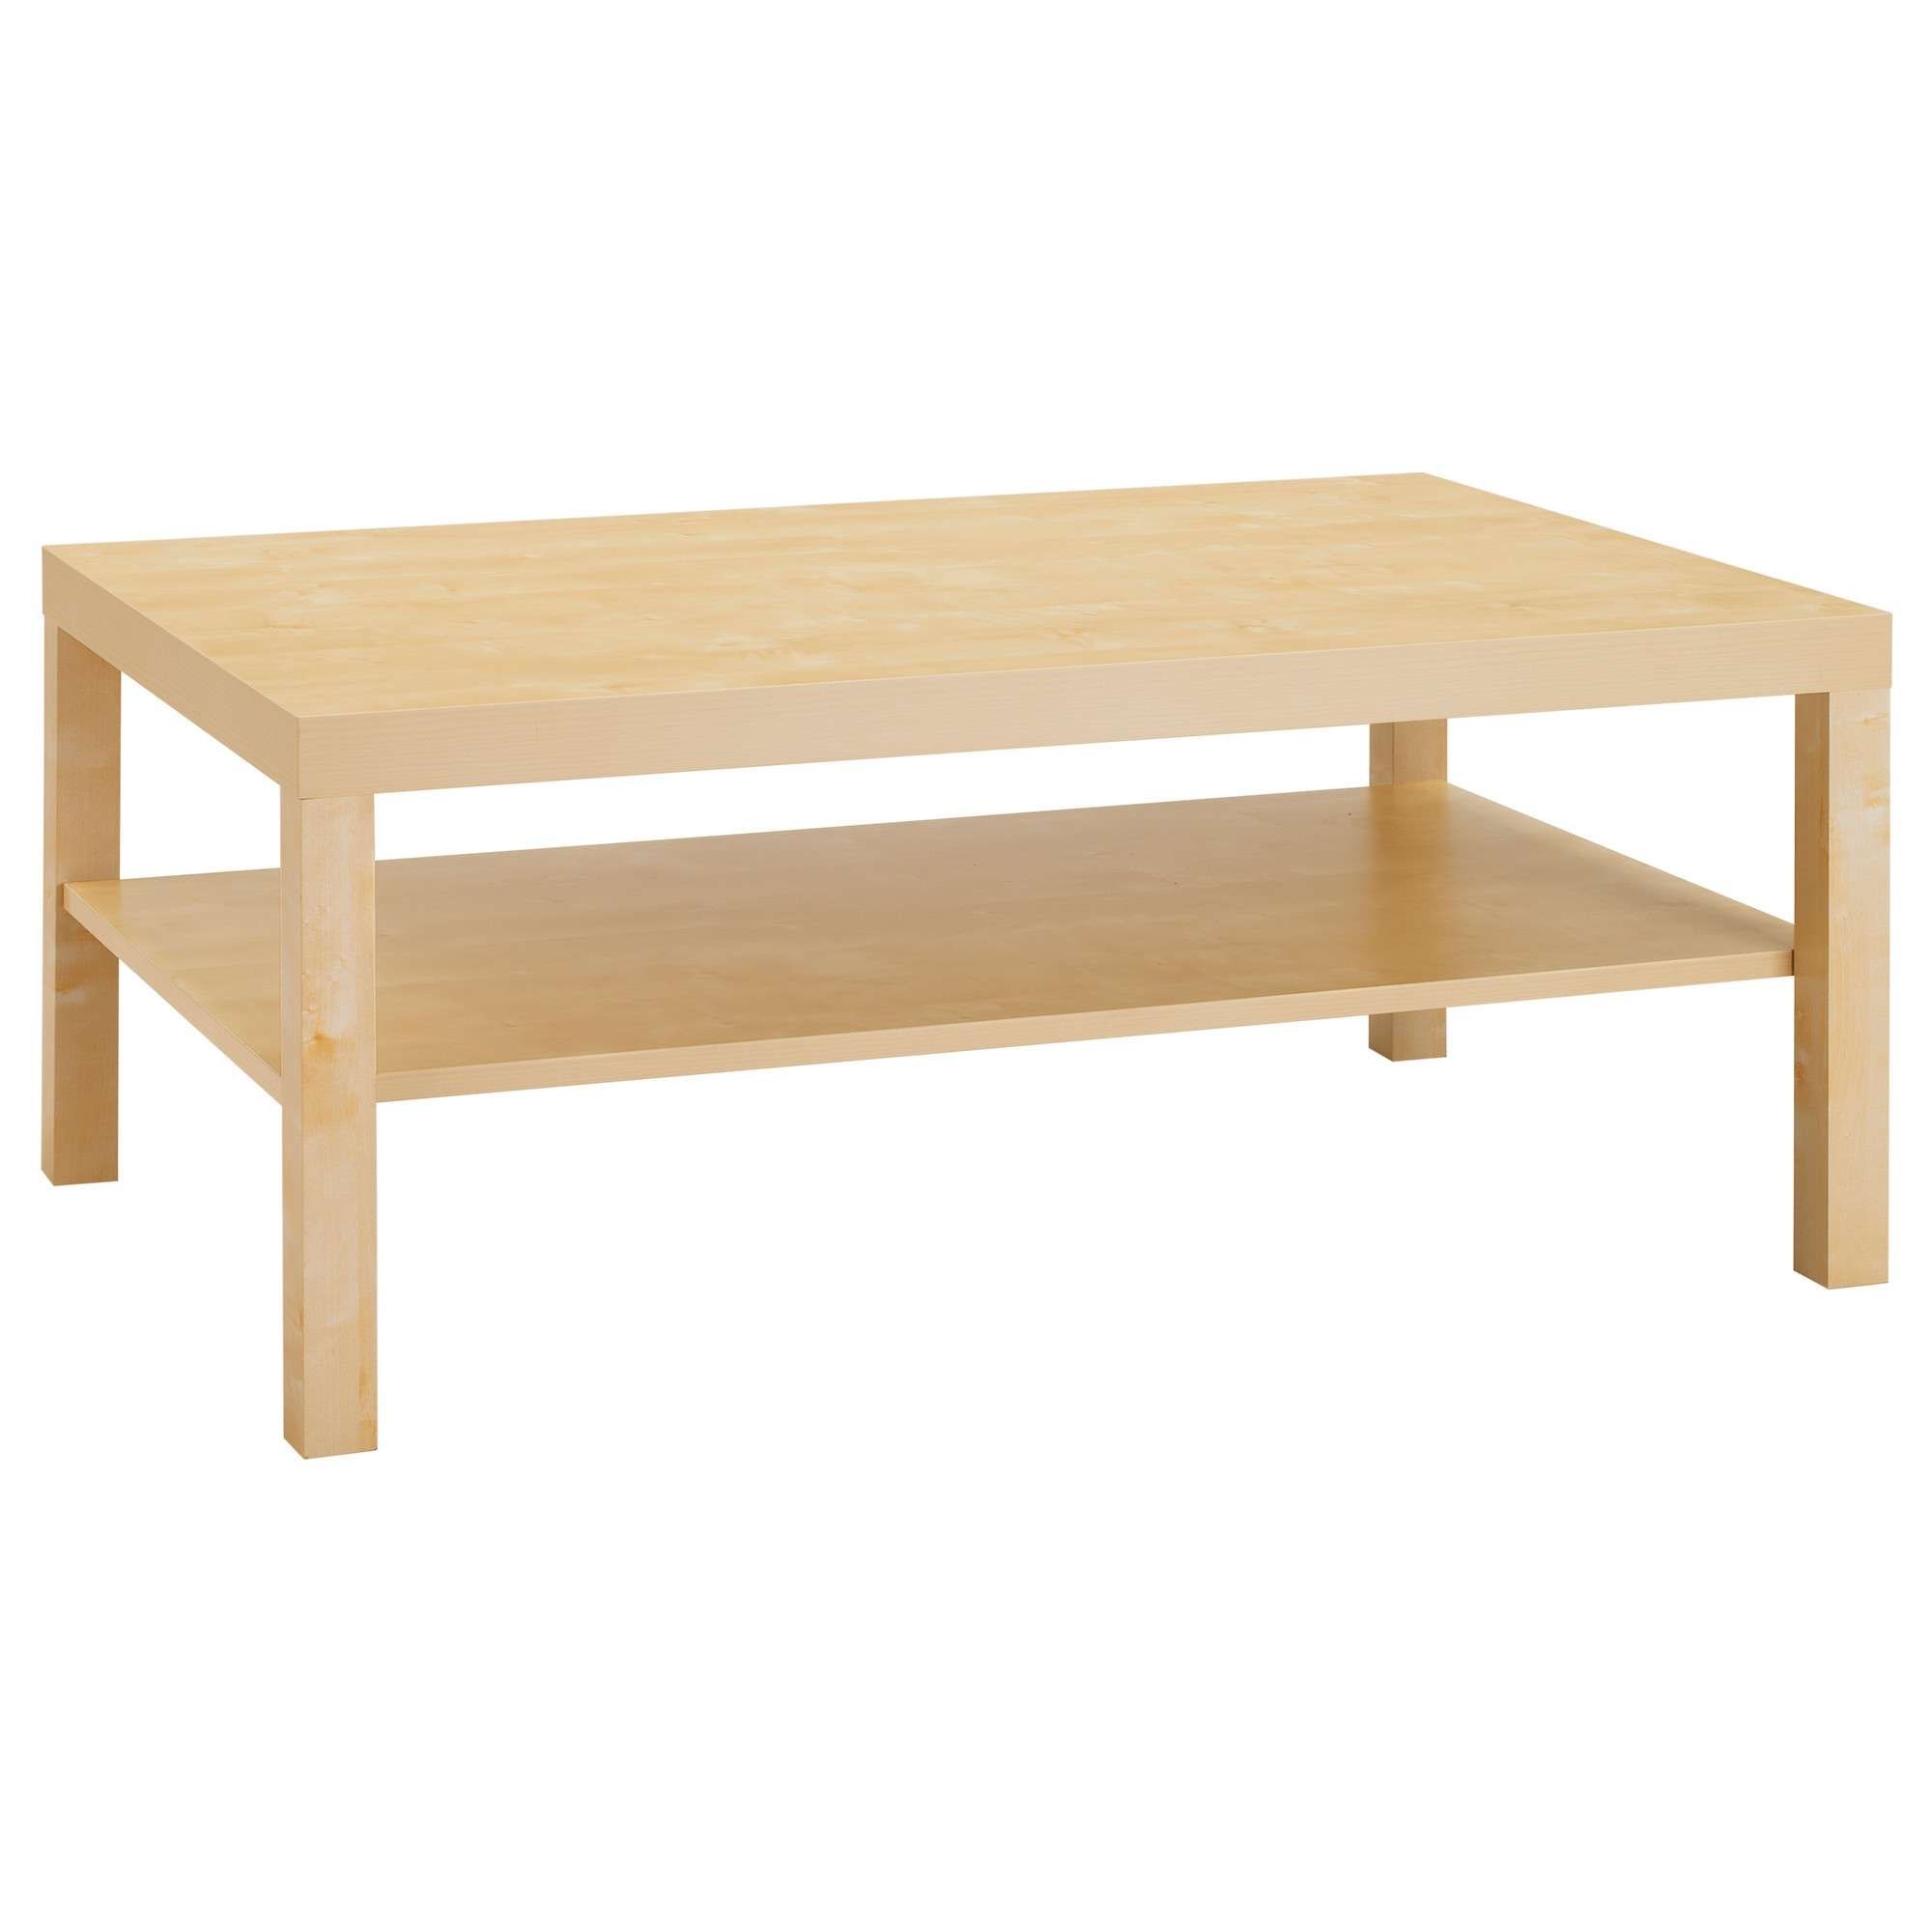 Lack Coffee Table – White – Ikea Inside Well Known Cheap Wood Coffee Tables (Gallery 7 of 20)